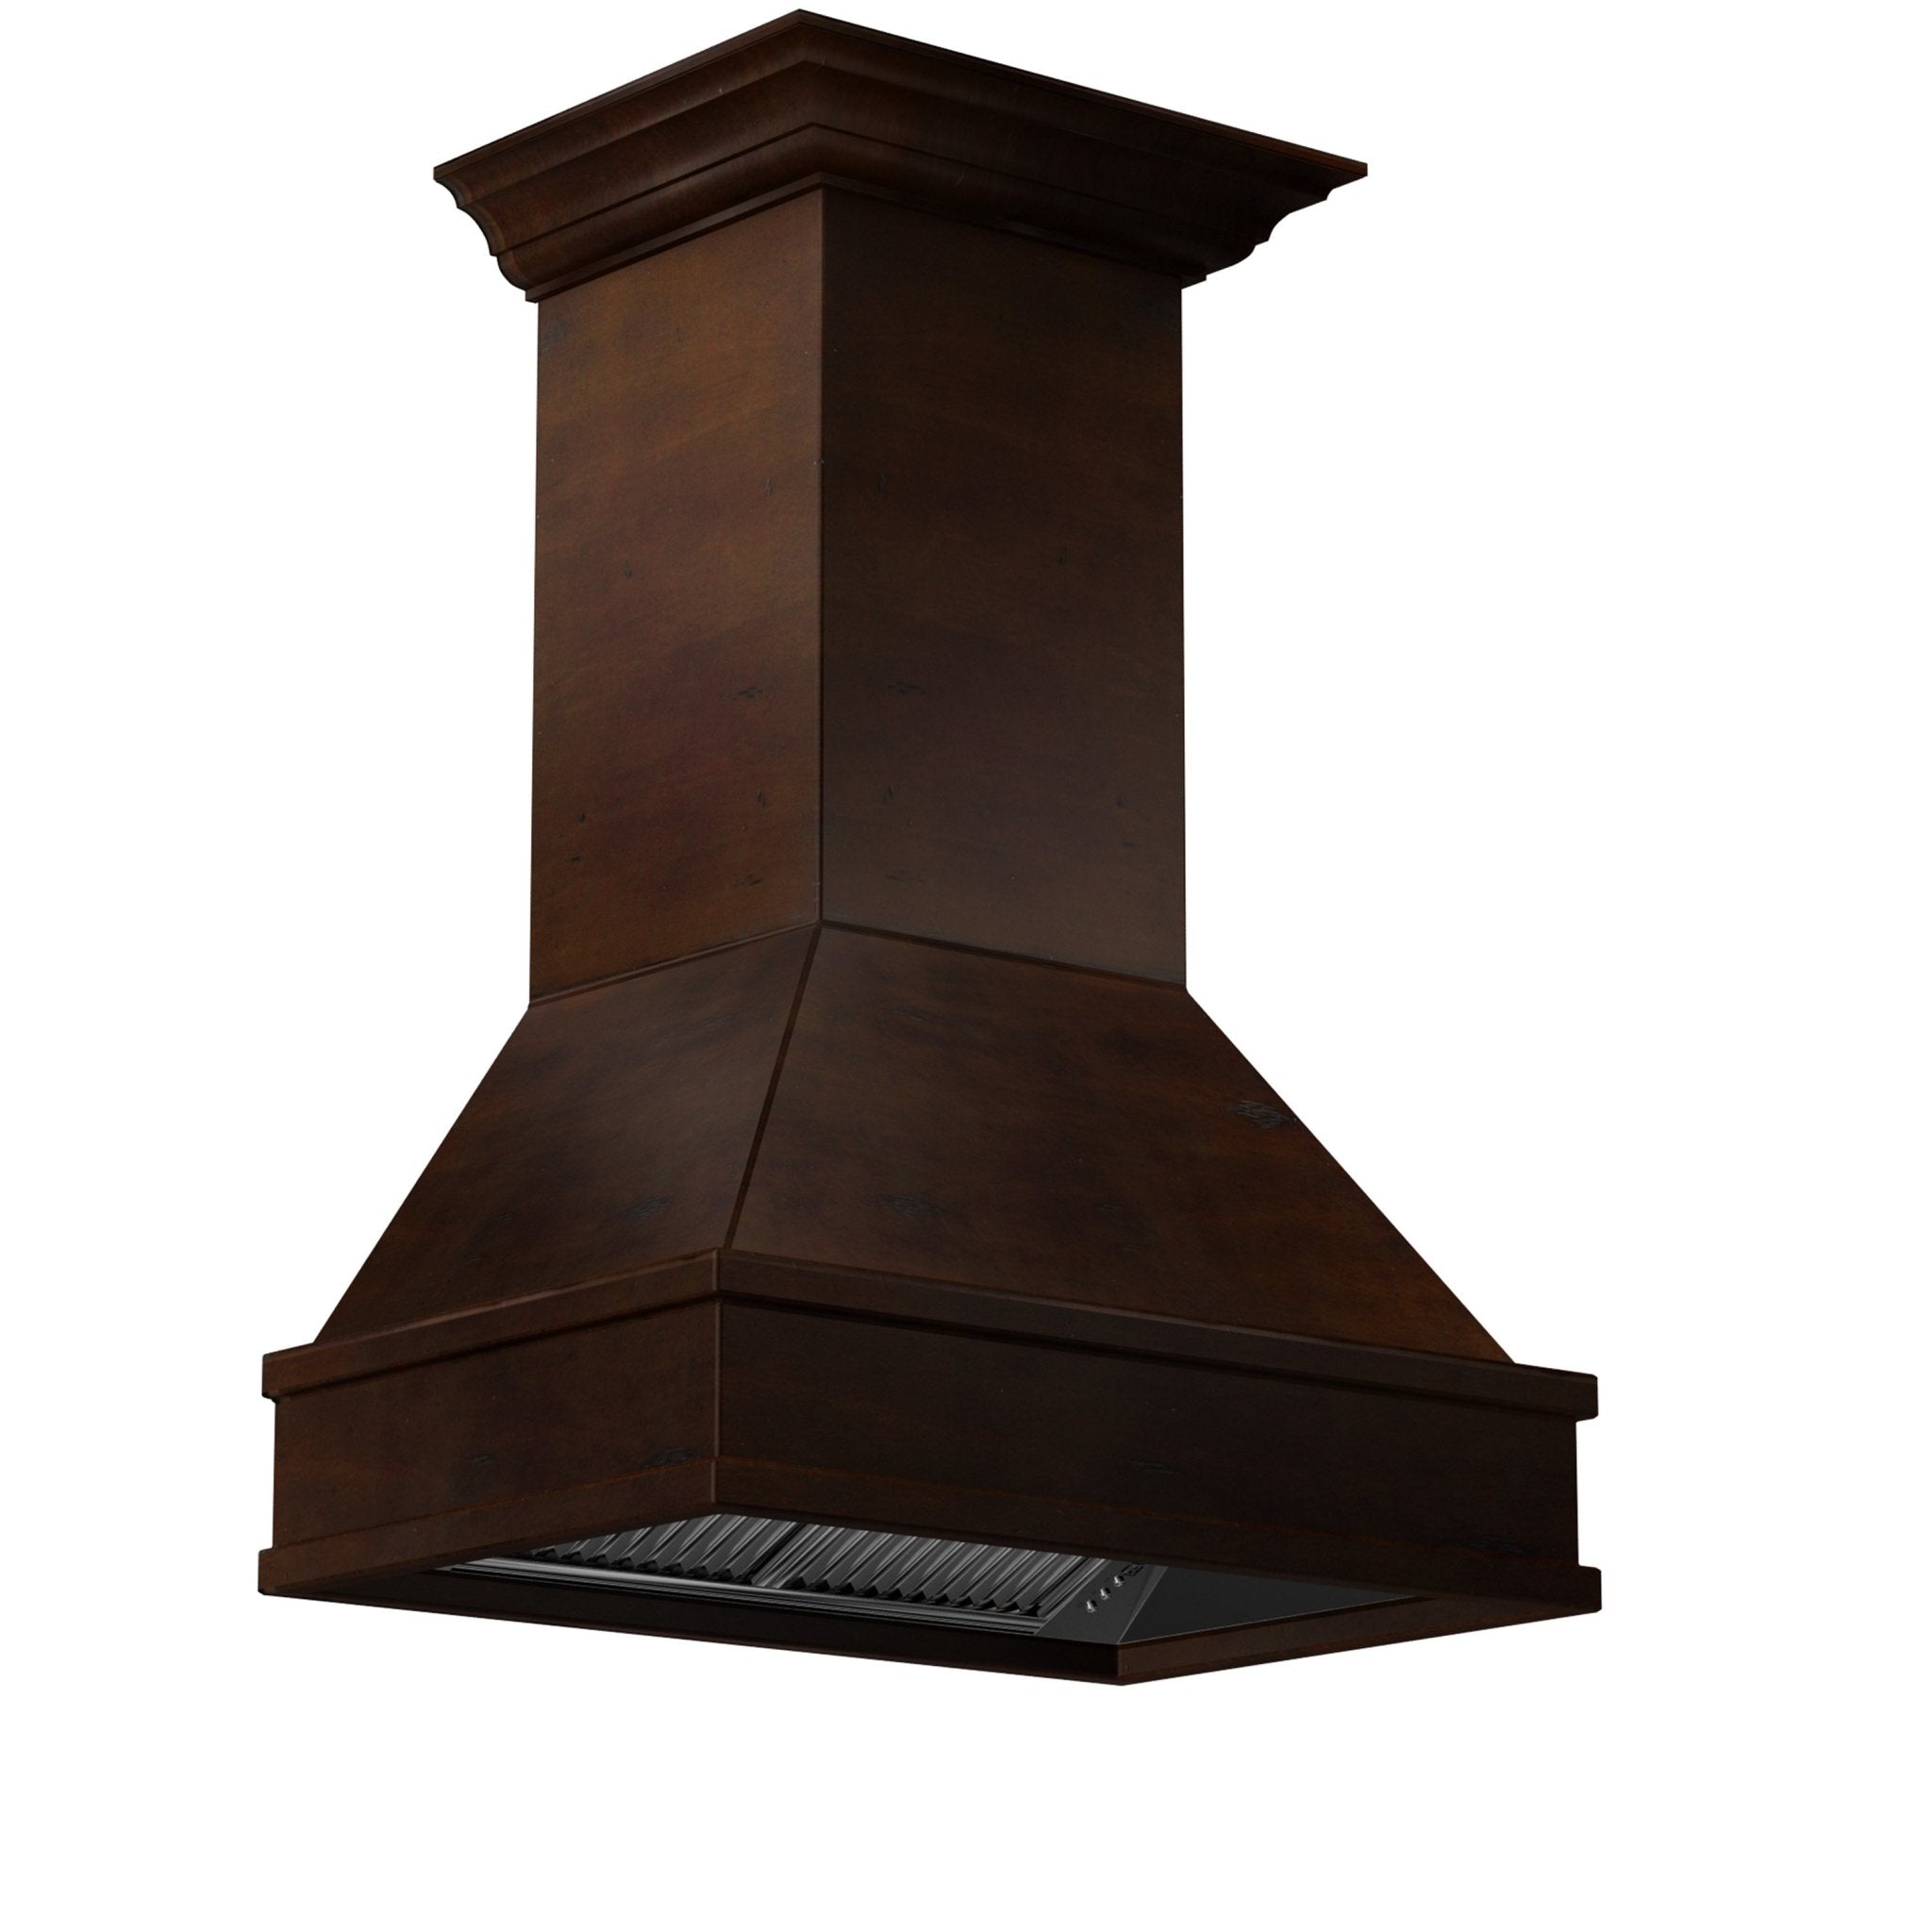 ZLINE 36" Wooden Wall Mount Range Hood in Walnut and Hamilton - Includes Single Remote Motor (329WH-RS-36-400) - Rustic Kitchen & Bath - Range Hoods - ZLINE Kitchen and Bath